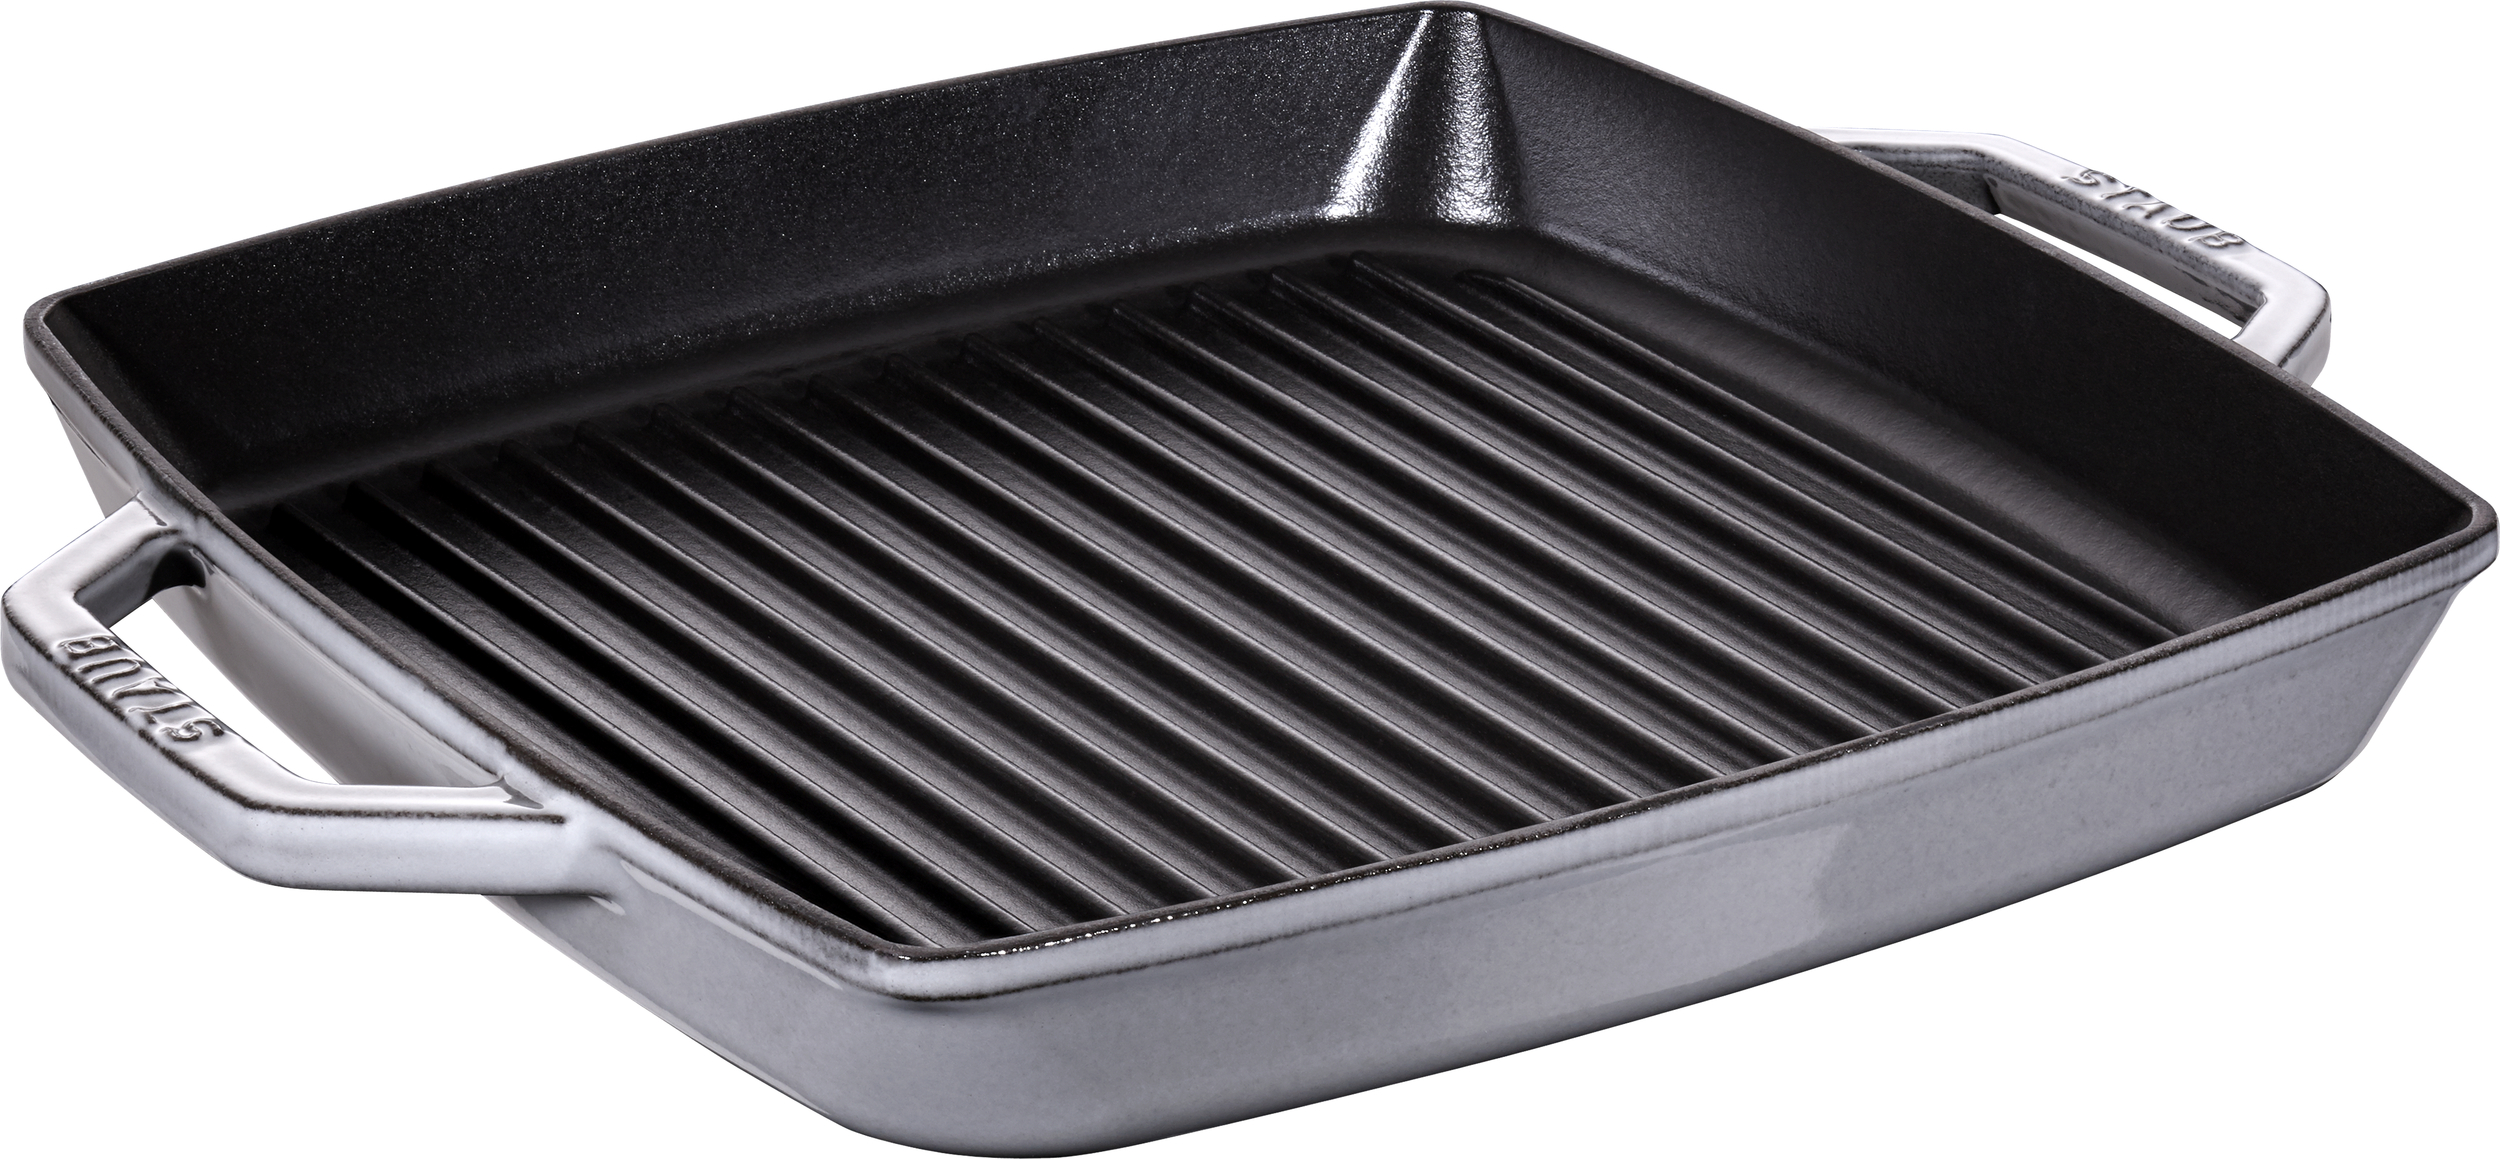 Double Grill Pan (Black)